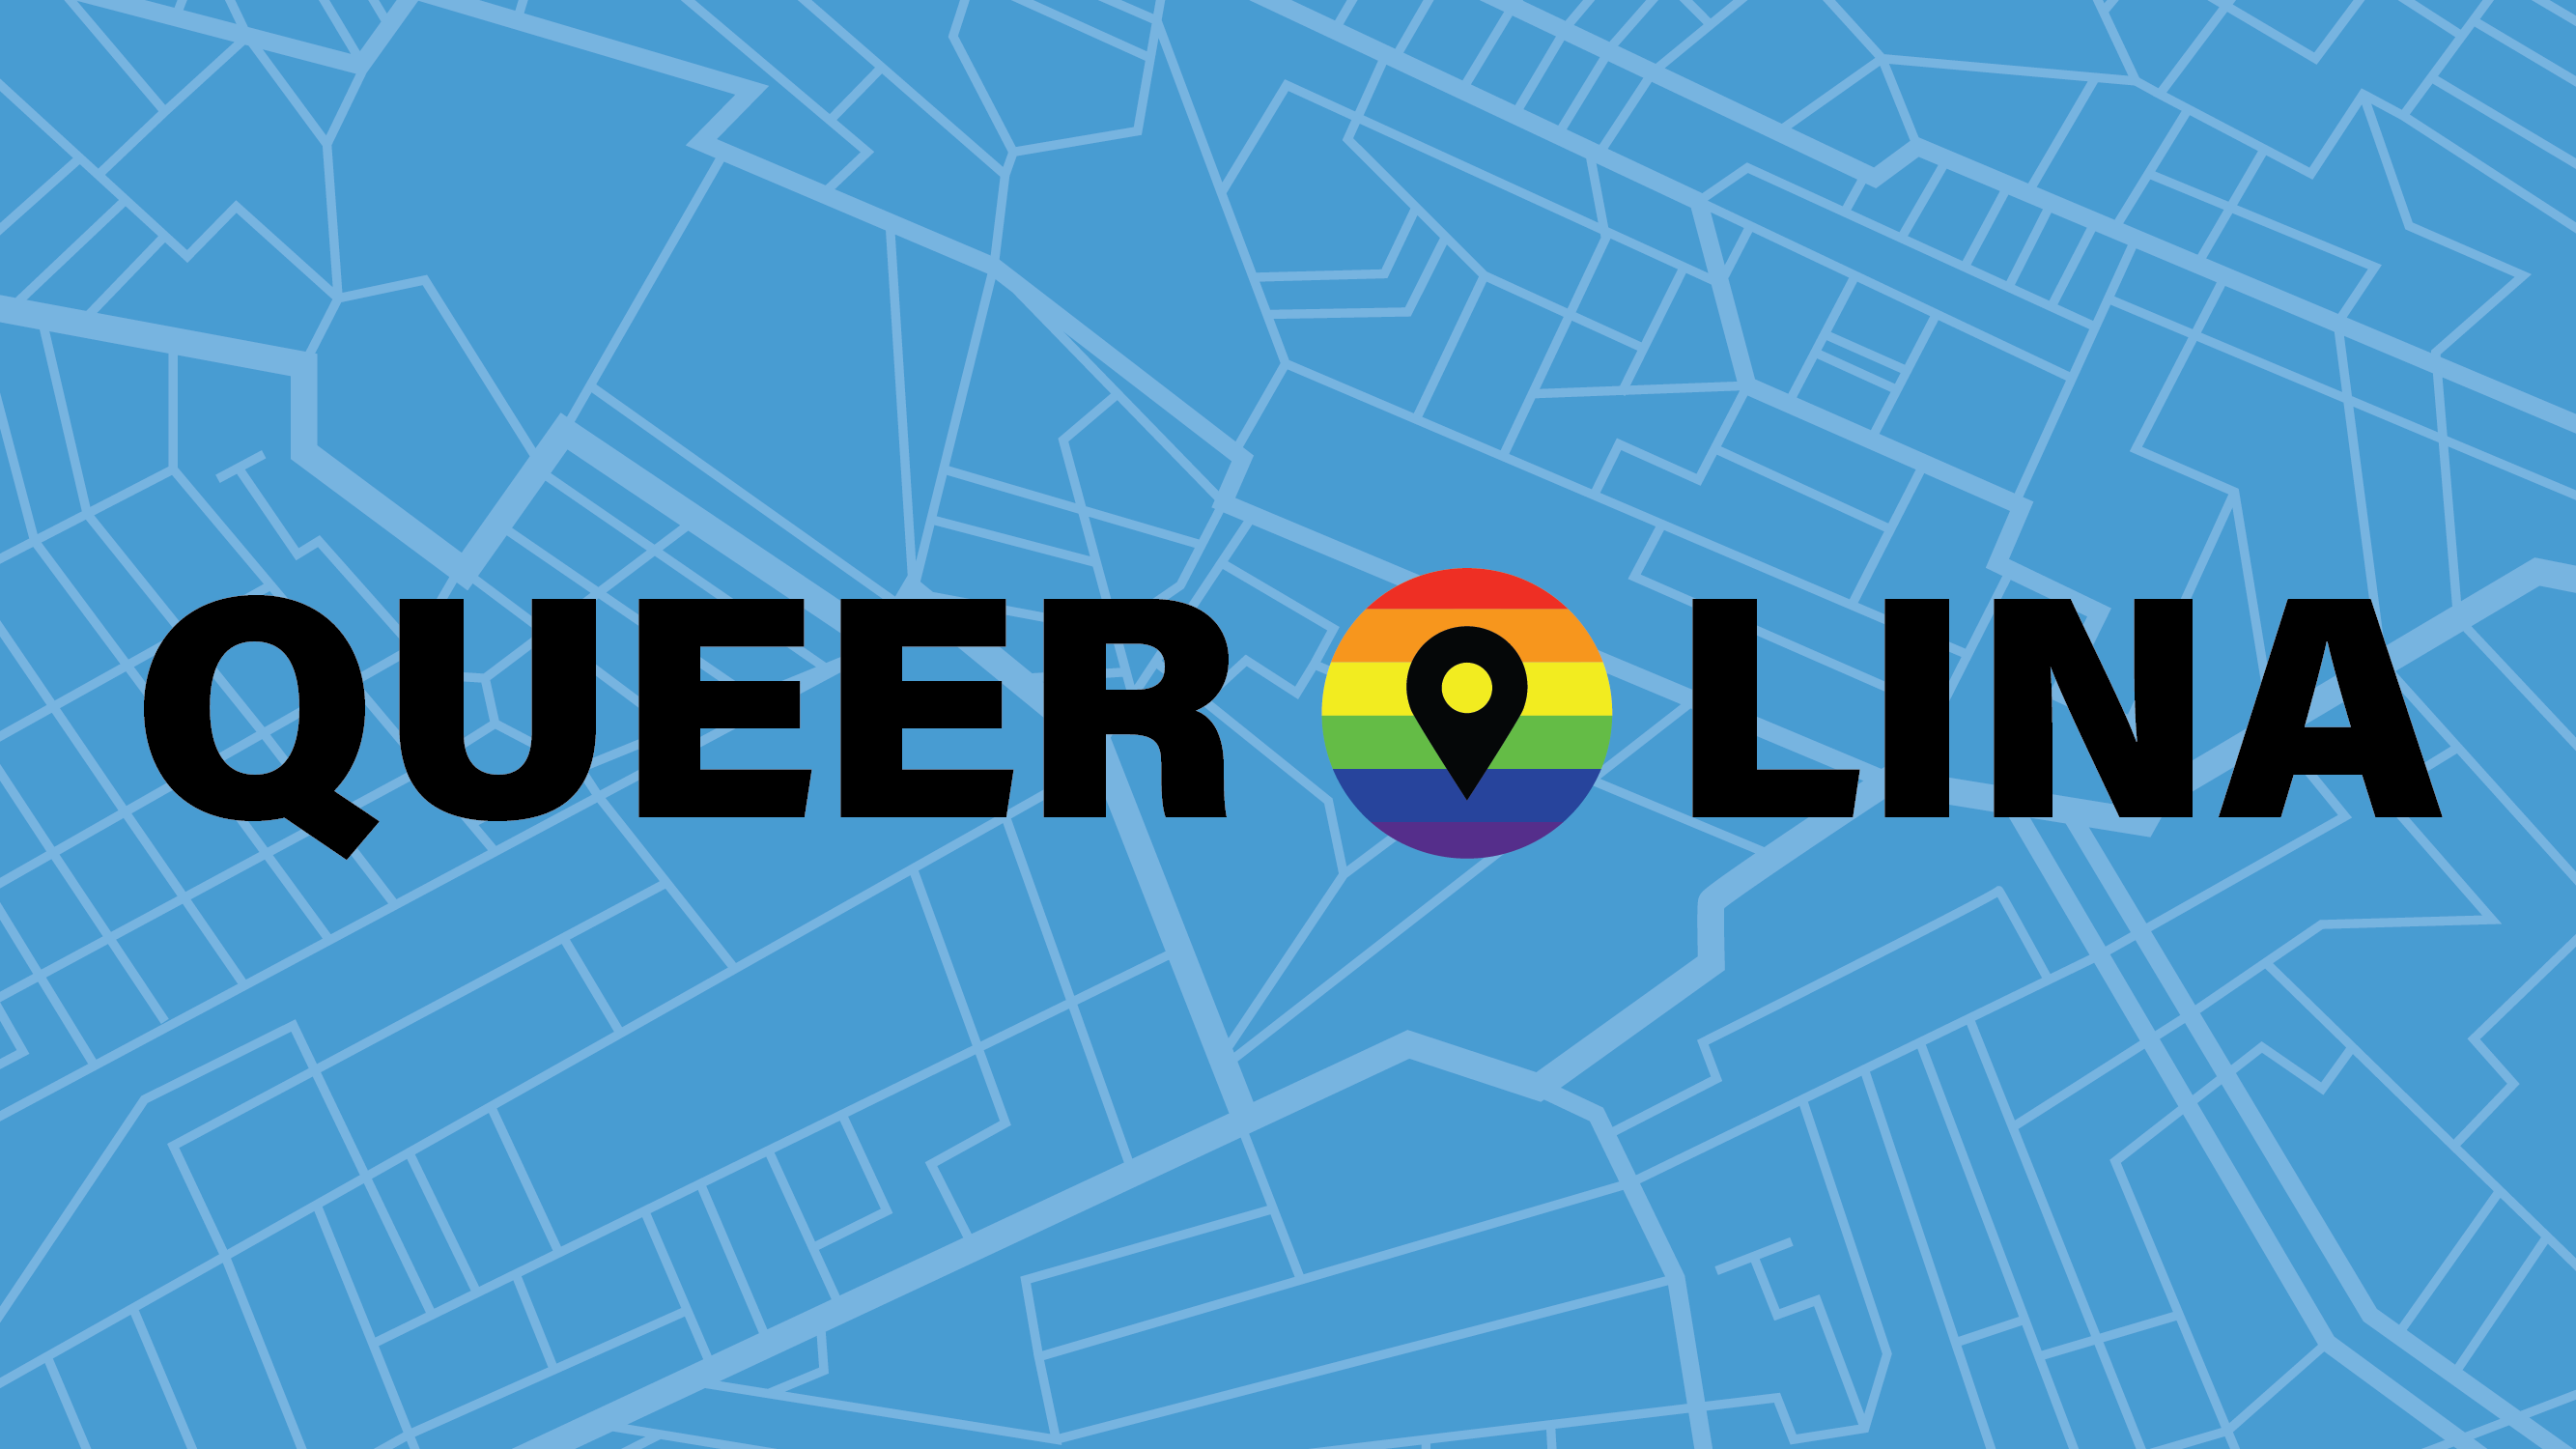 Queerolina: Experiences of Place and Space through Oral Histories